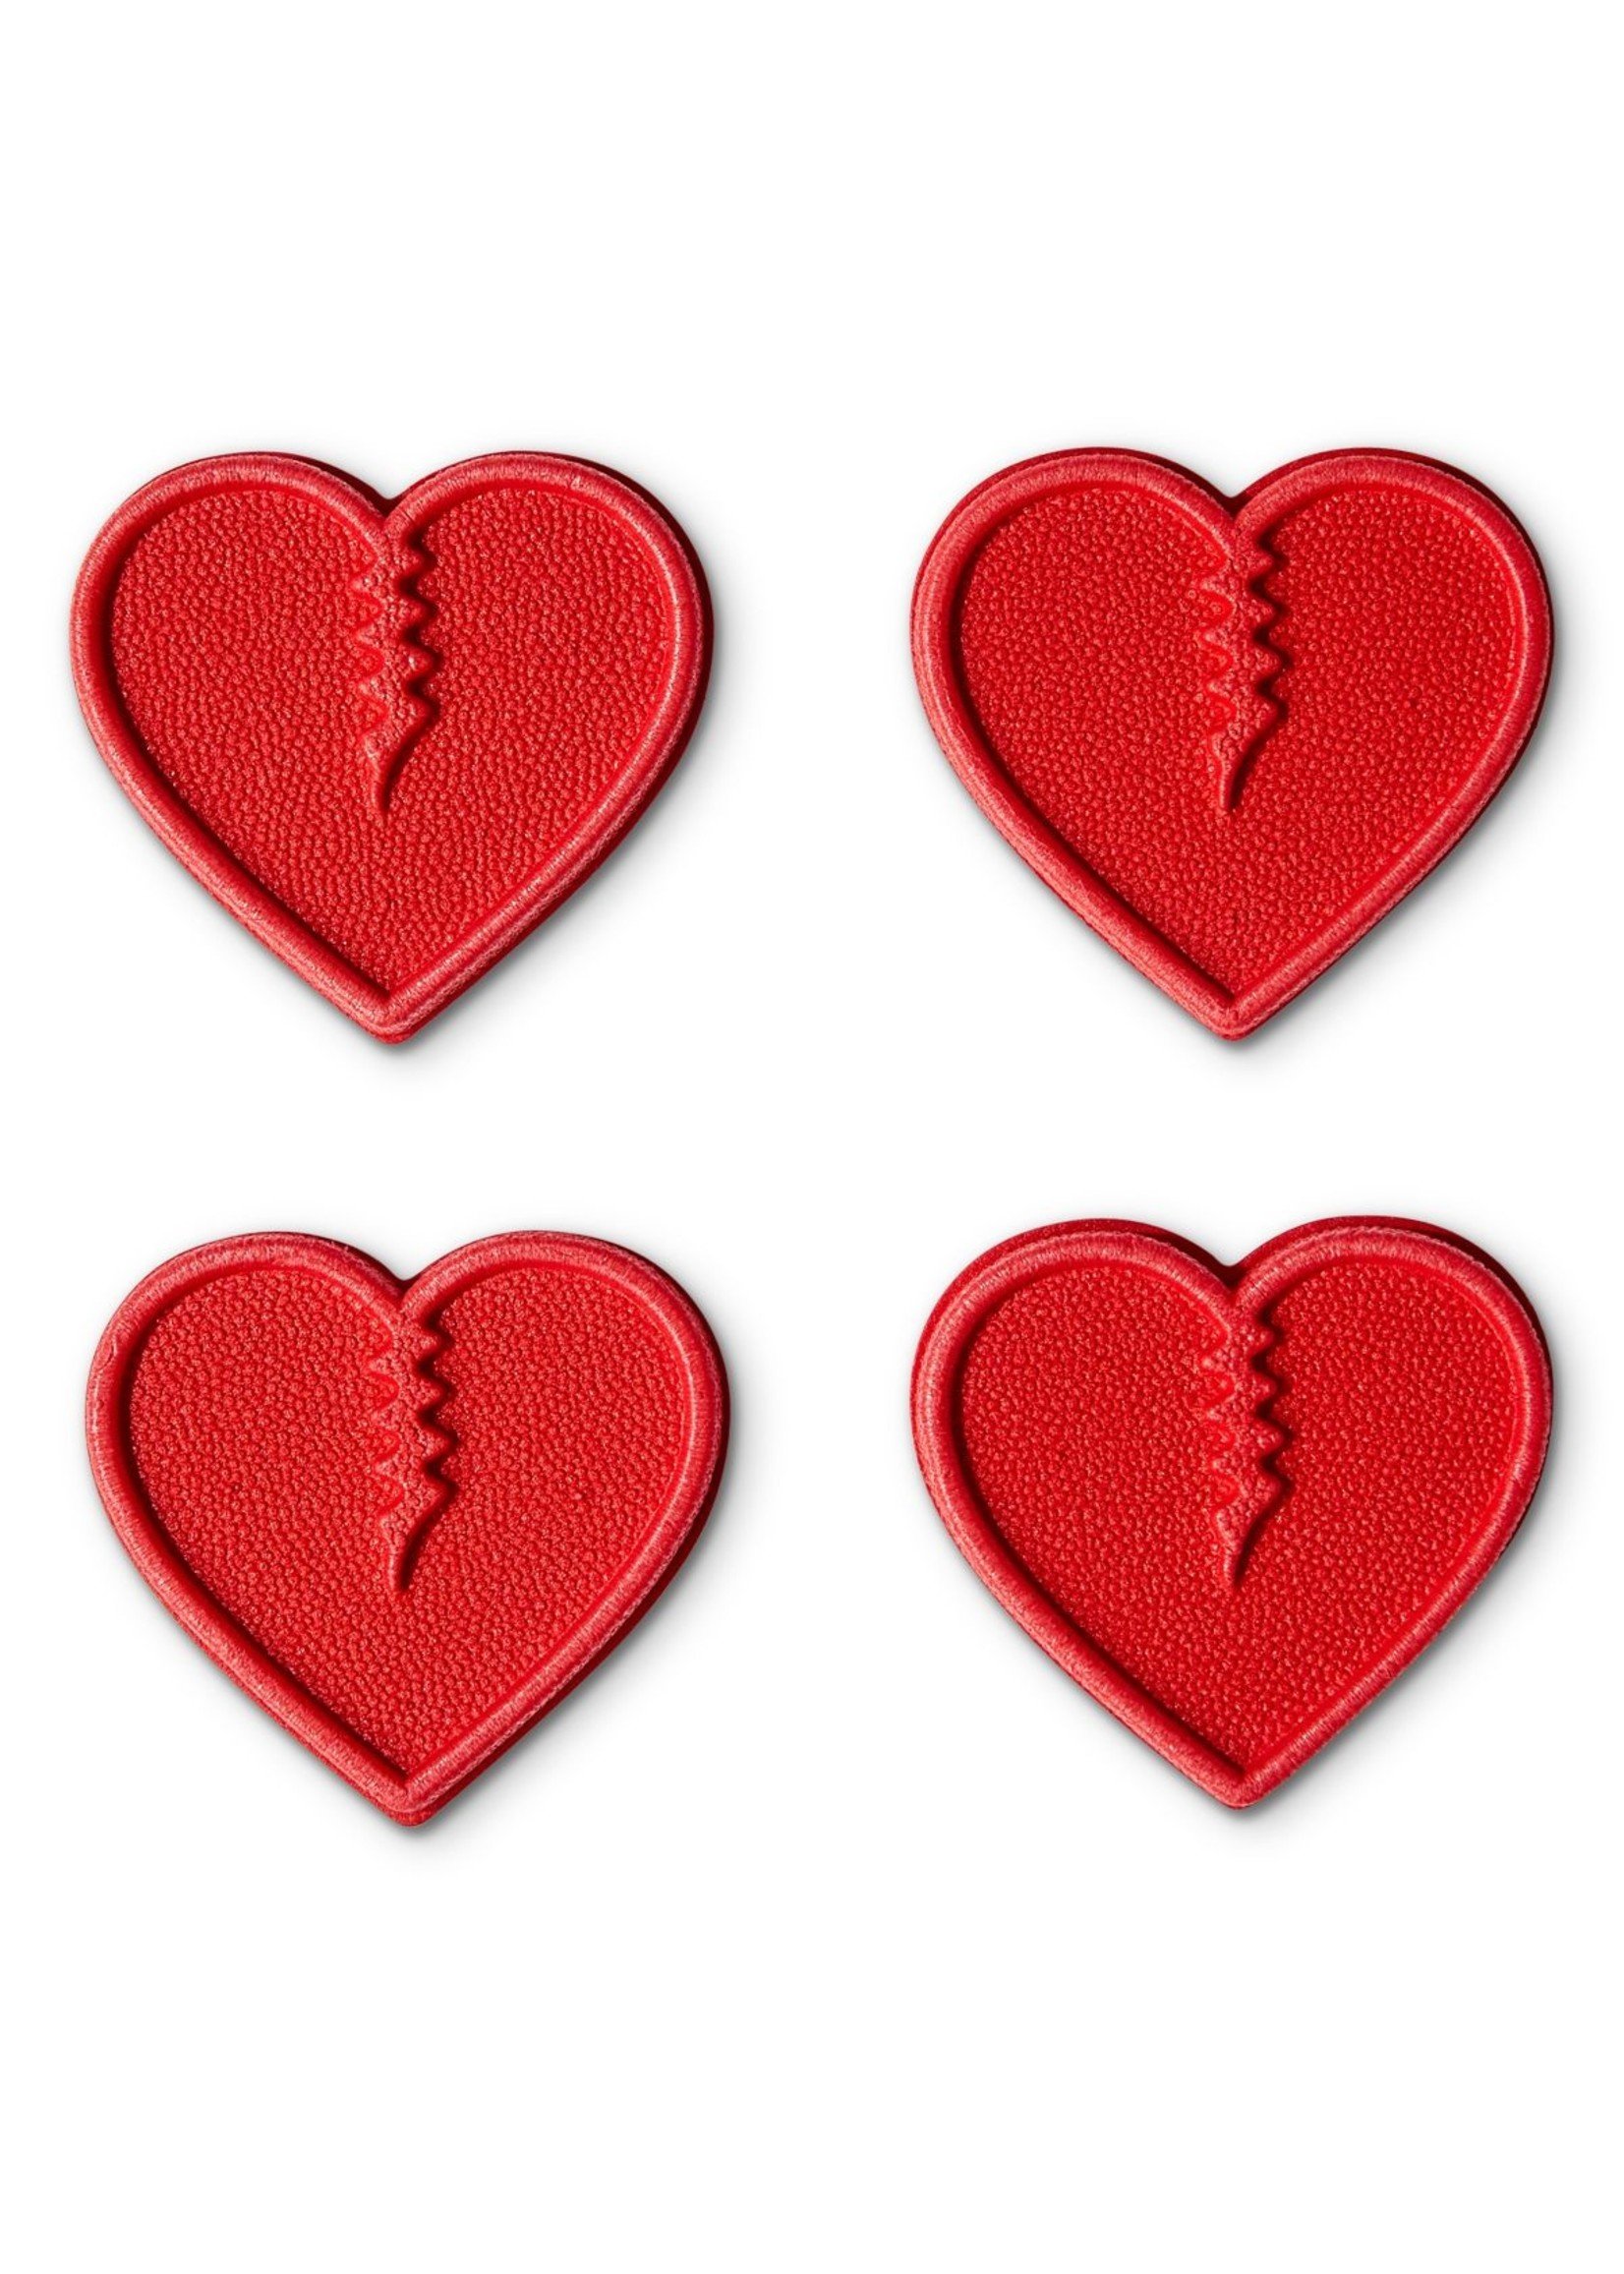 Crab Grab Traction Pad Mini Heart Red